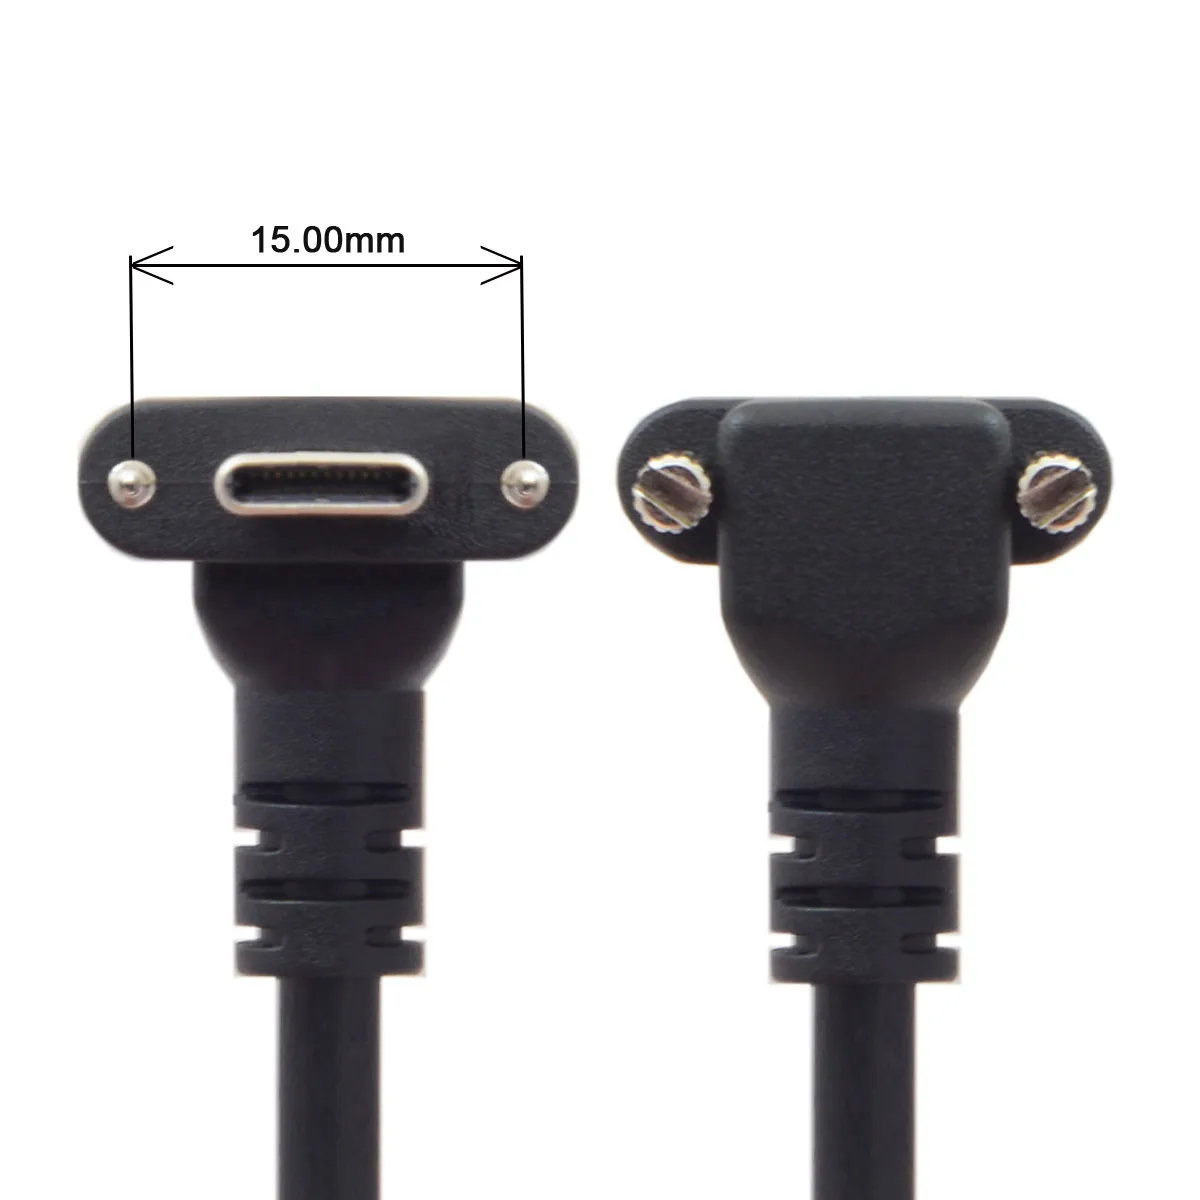 

CYSM Up Angled USB 3.1 Type-C Dual Screw Locking to Standard USB3.0 Data Cable